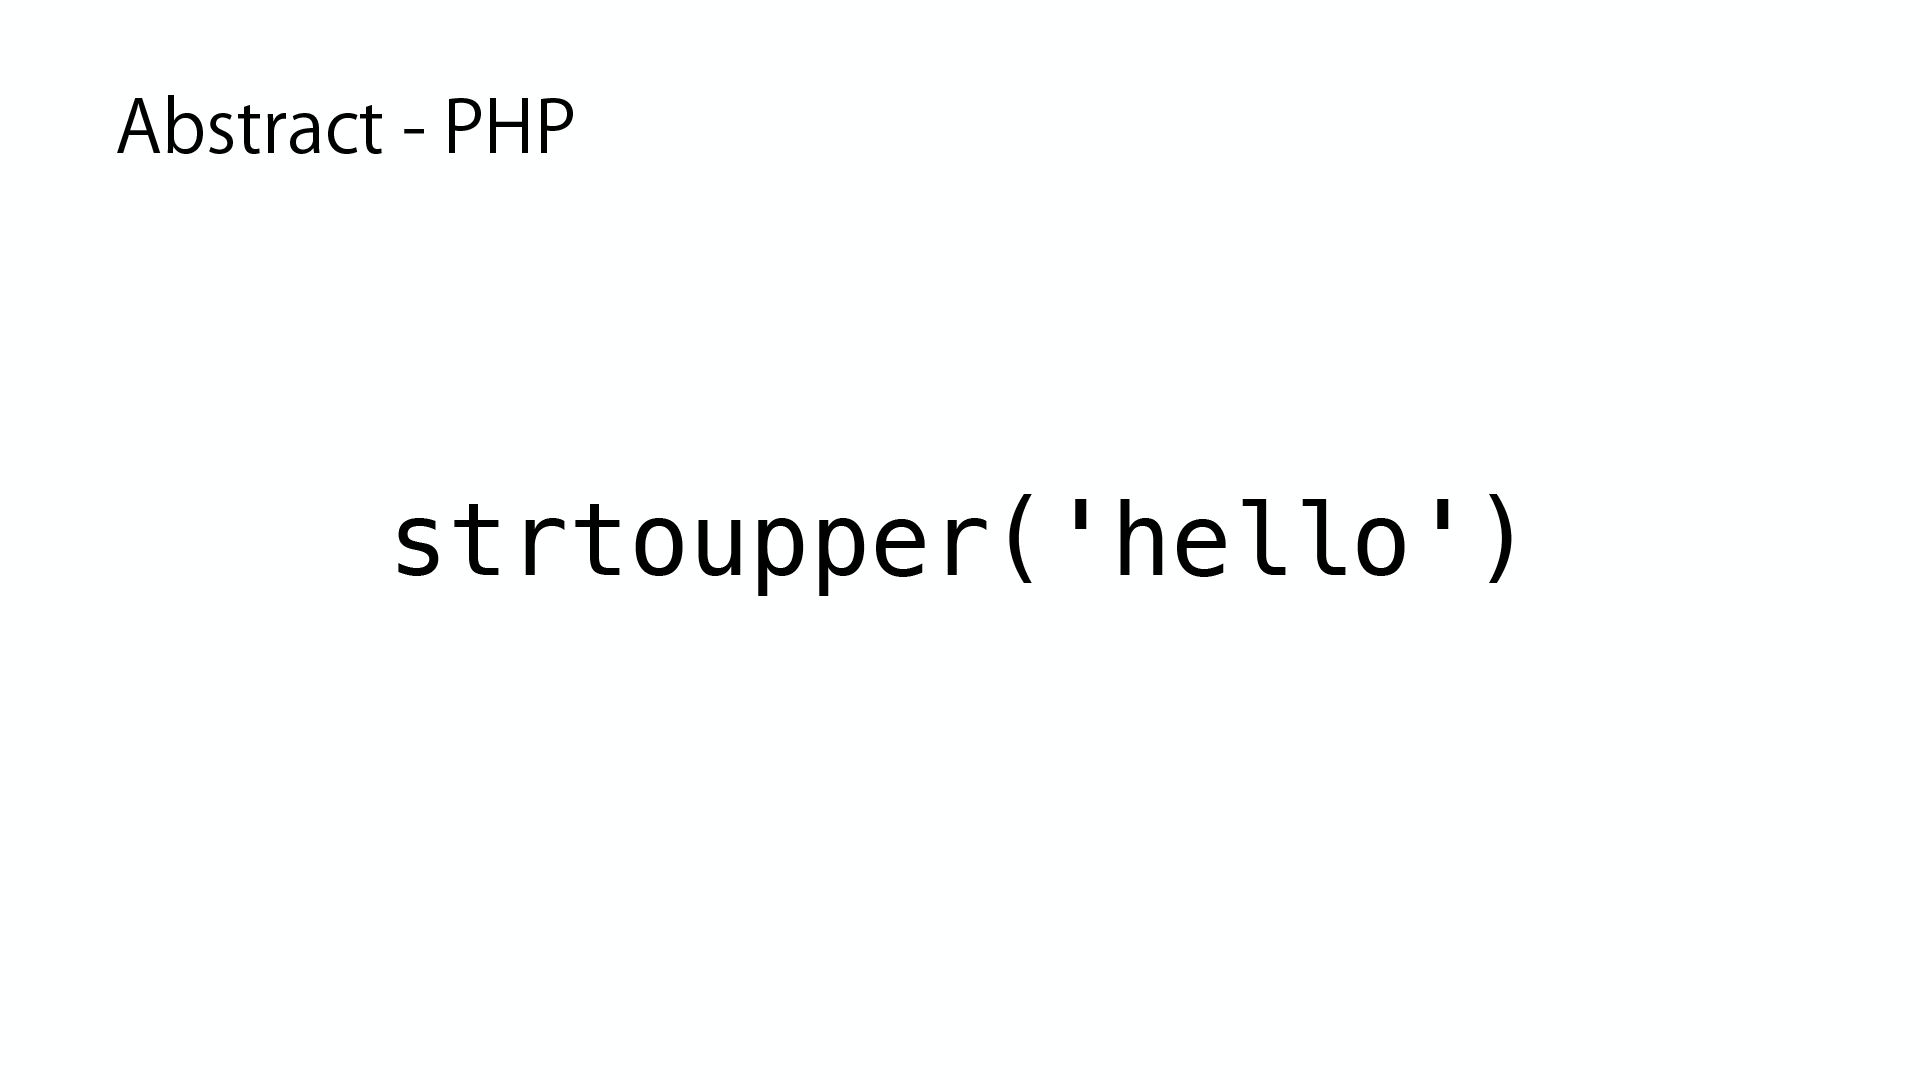 Abstract - PHP: strtoupper('hello')